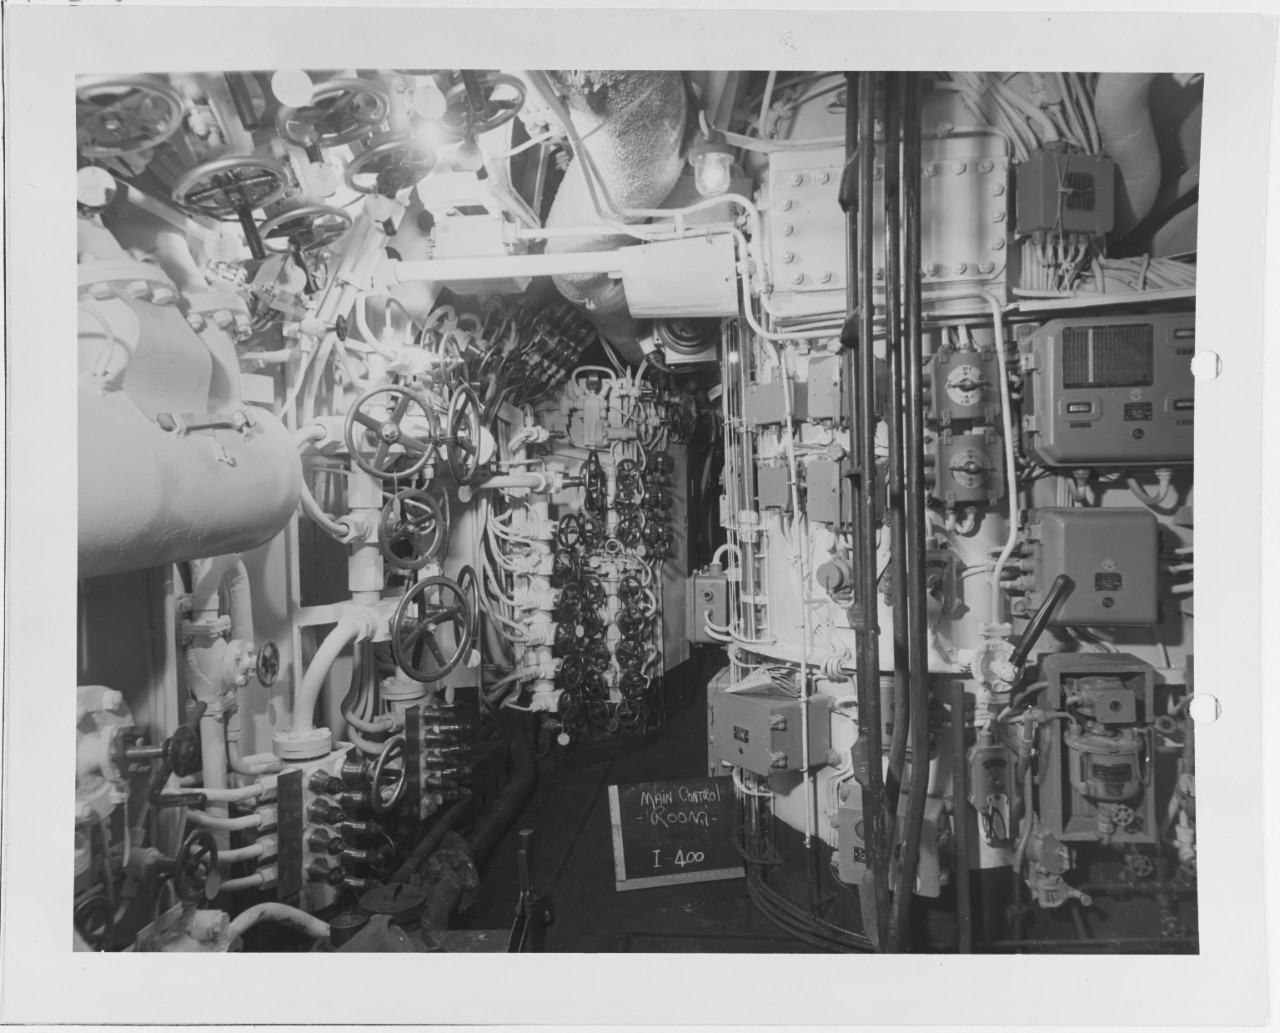 Main Control Room on the I-400 Japanese Submarine, looking aft